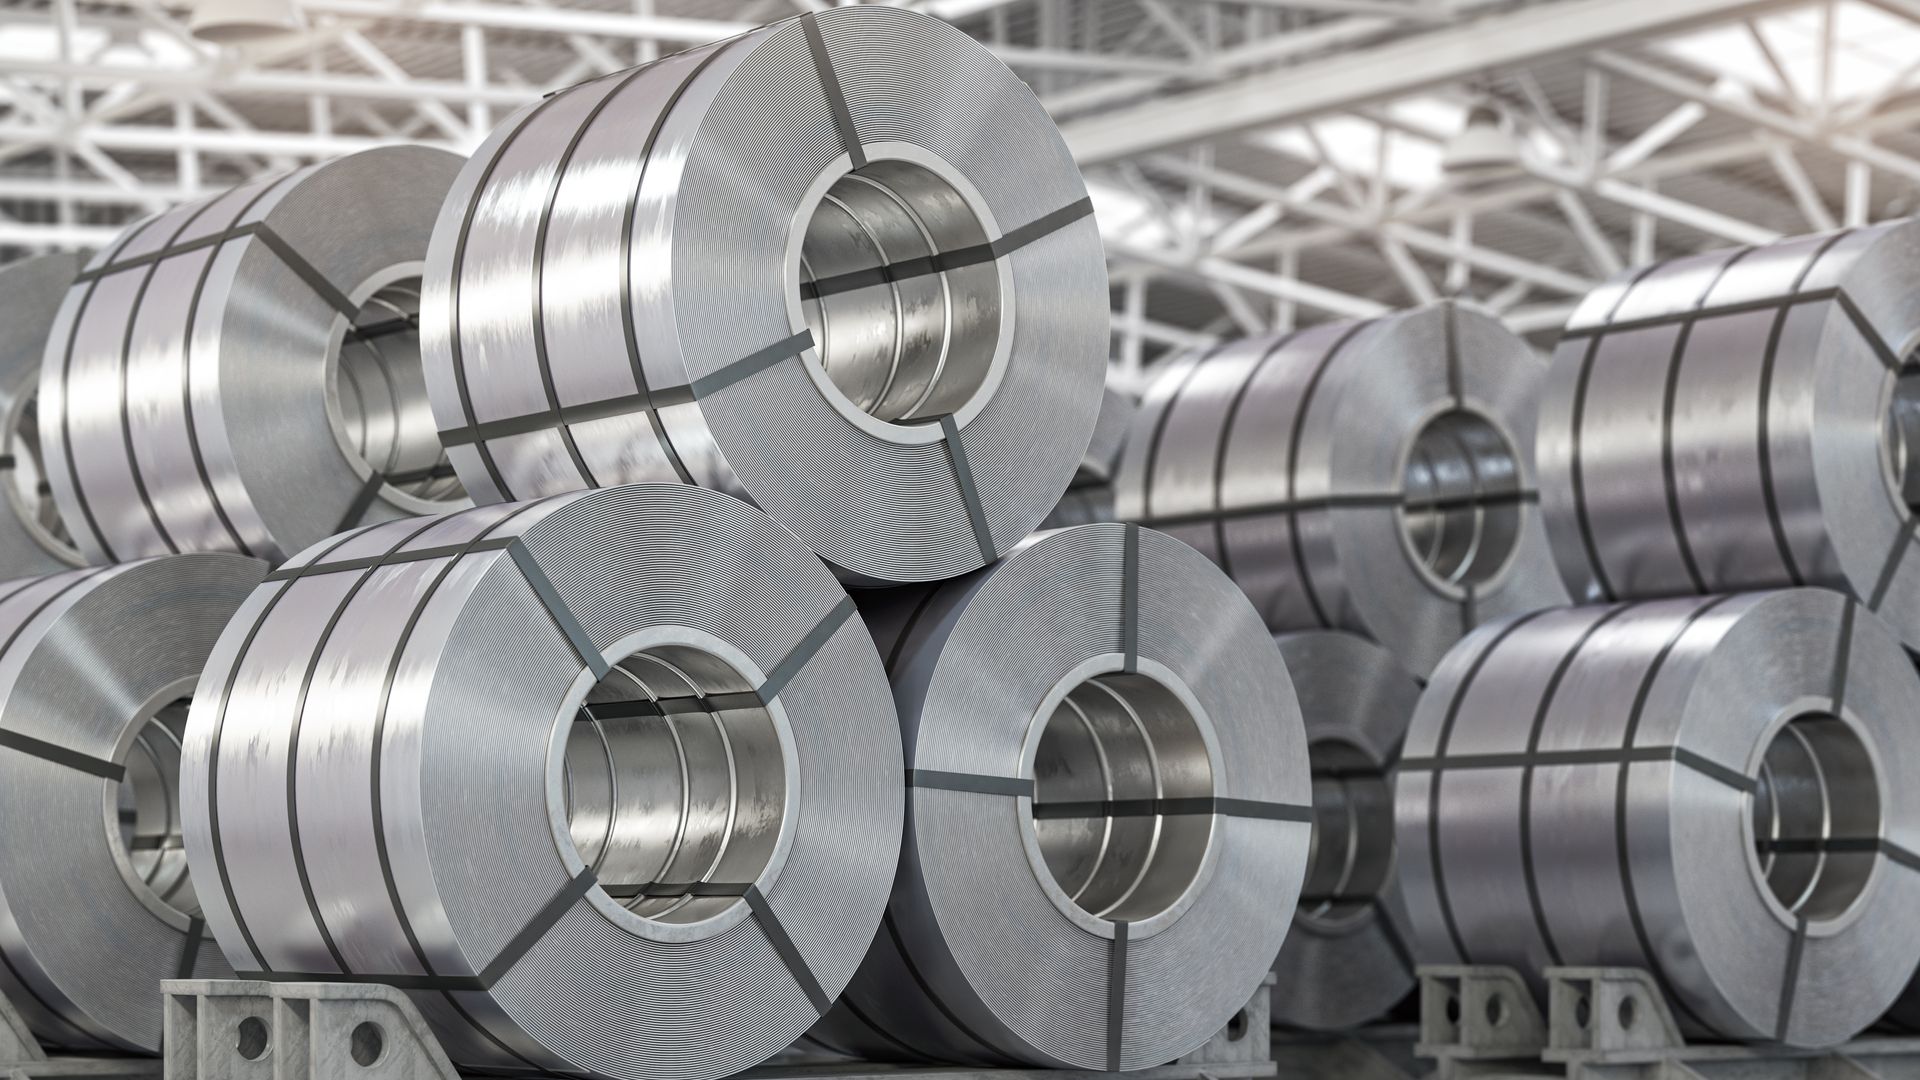 Biden's new tariffs might help American metal manufacturers but will cause problems for American businesses and workers who use these metals.